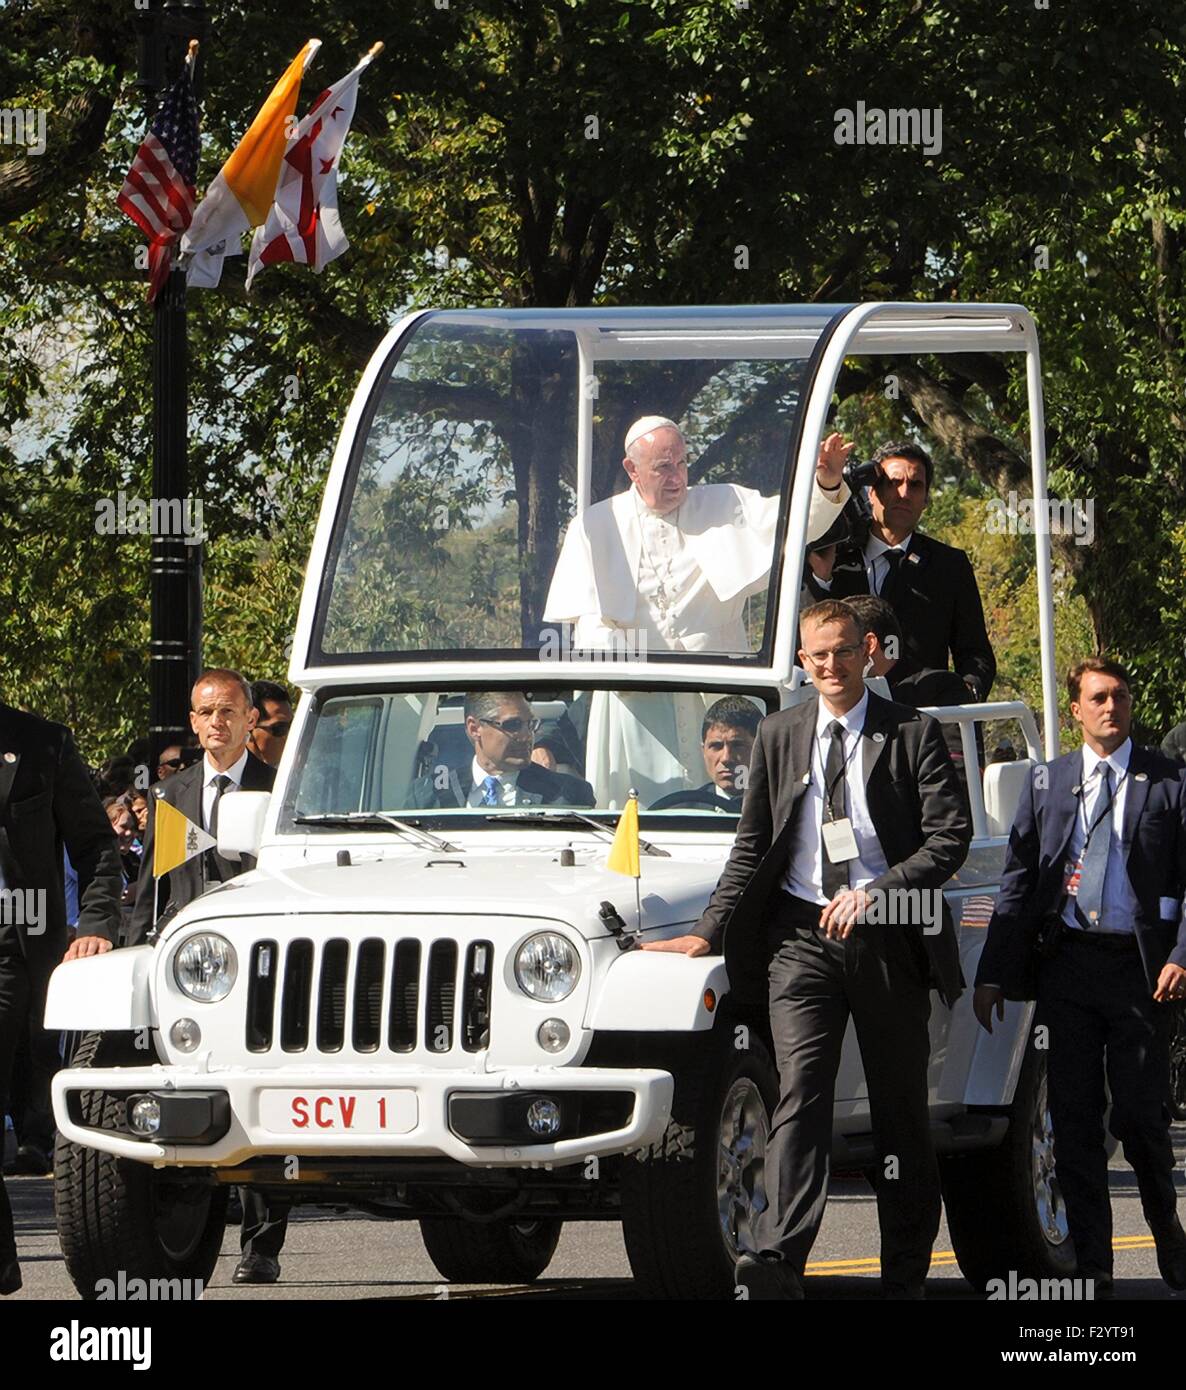 Pope Francis waves to crowds gathered for his motorcade along Pennsylvania Avenue to the Capitol September 23, 2015 in Washington, DC. This is the first visit by Pope Francis to the United States. Stock Photo